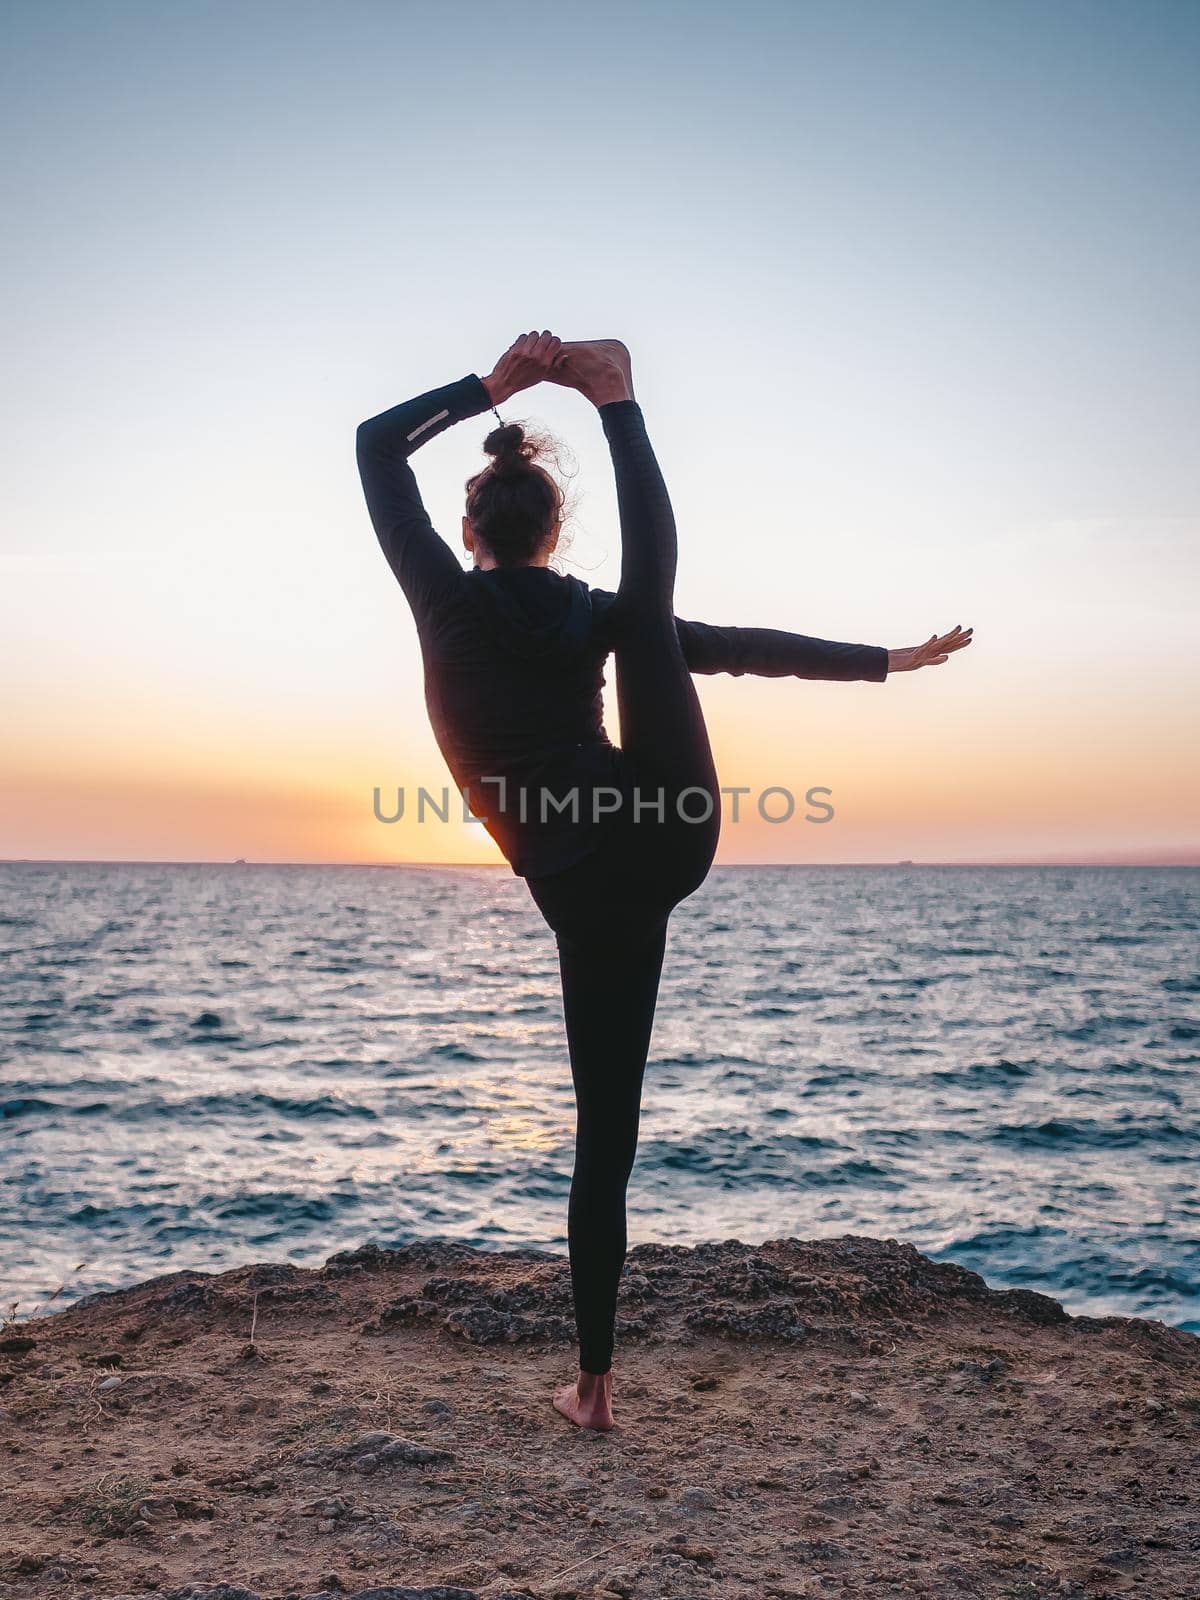 Slim woman in black bodysuit practicing yoga near sea or ocean during sunrise light. Flexibility, stretching, fitness, healthy lifestyle. High quality photo